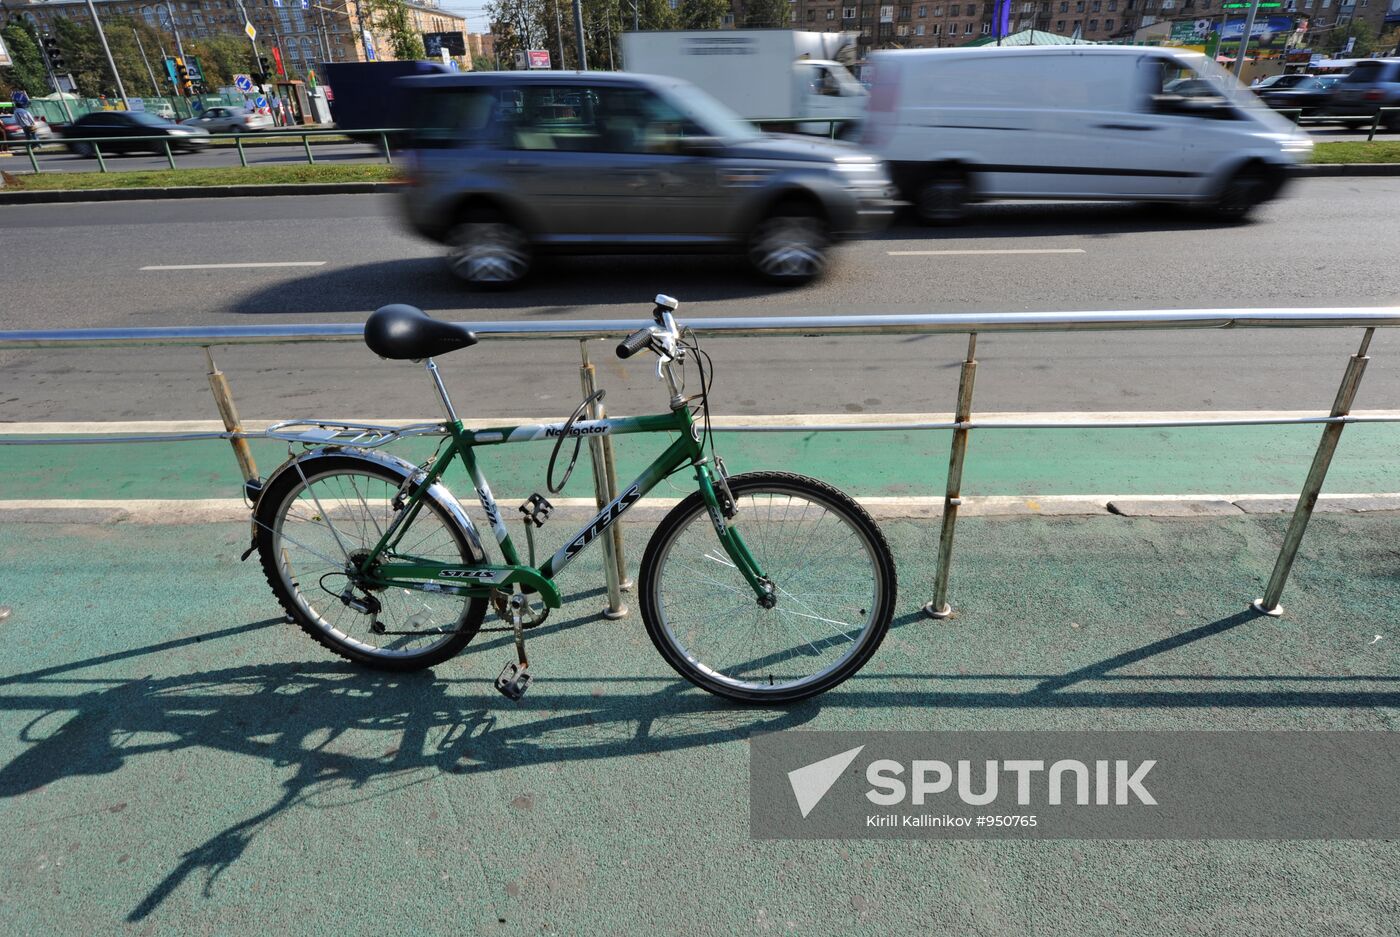 Dedicated lane for cyclists in Metro area of Moscow University